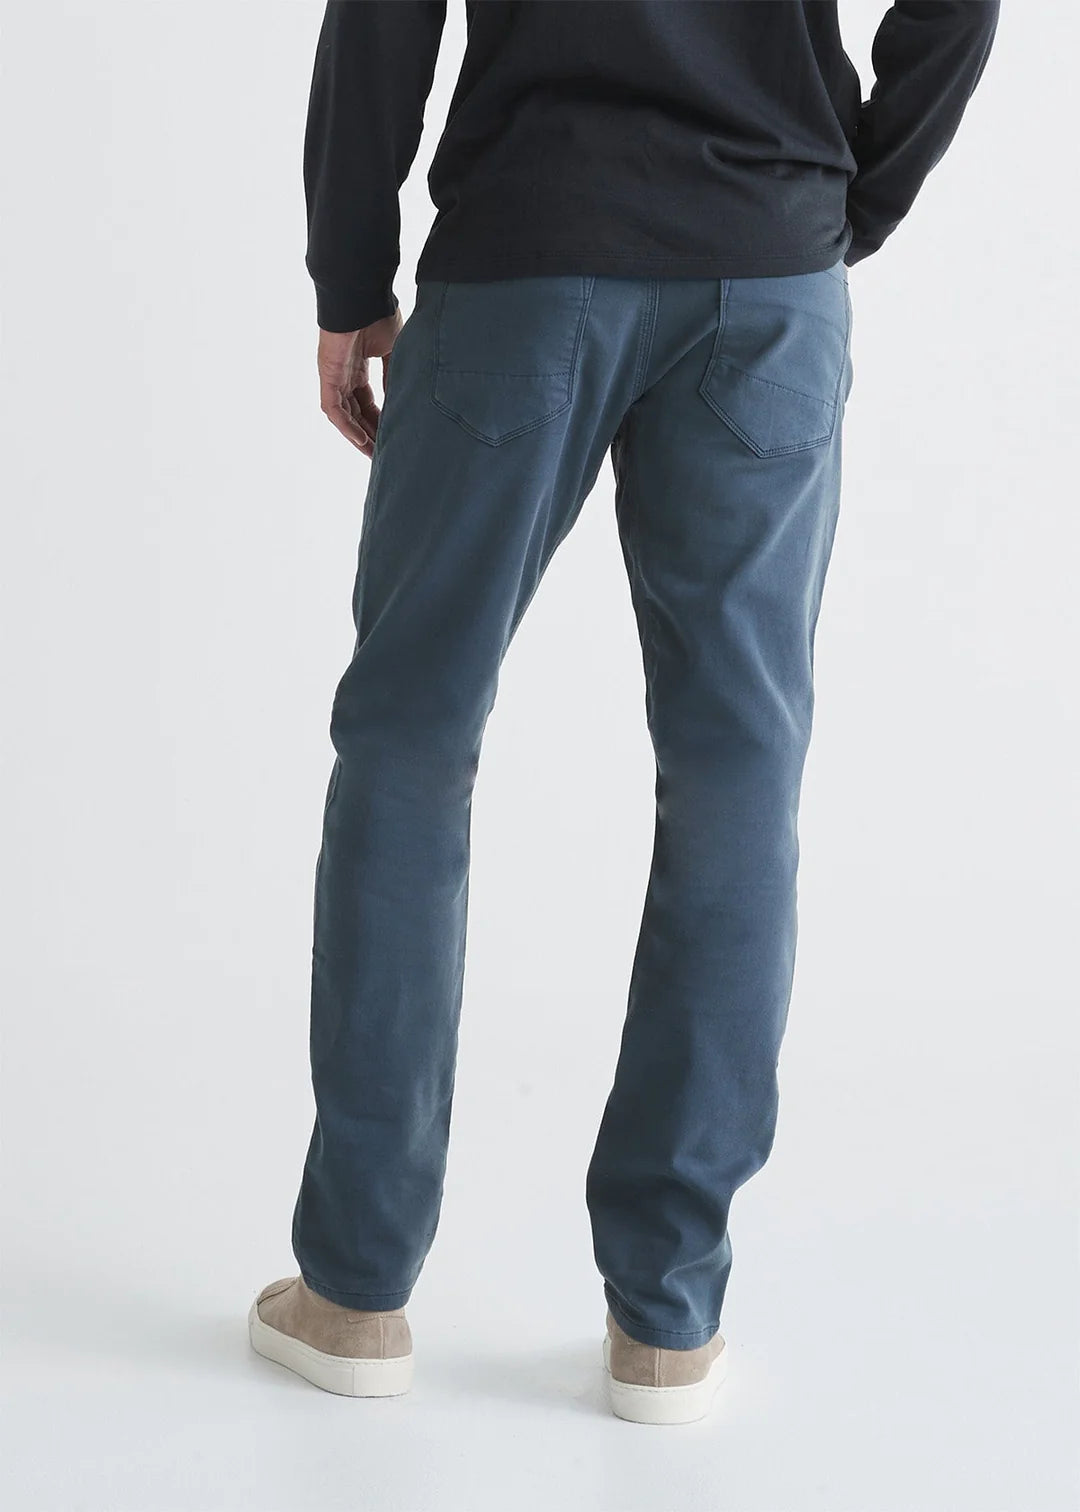 DUER Men's No Sweat Relaxed Taper Pant (Past Season)